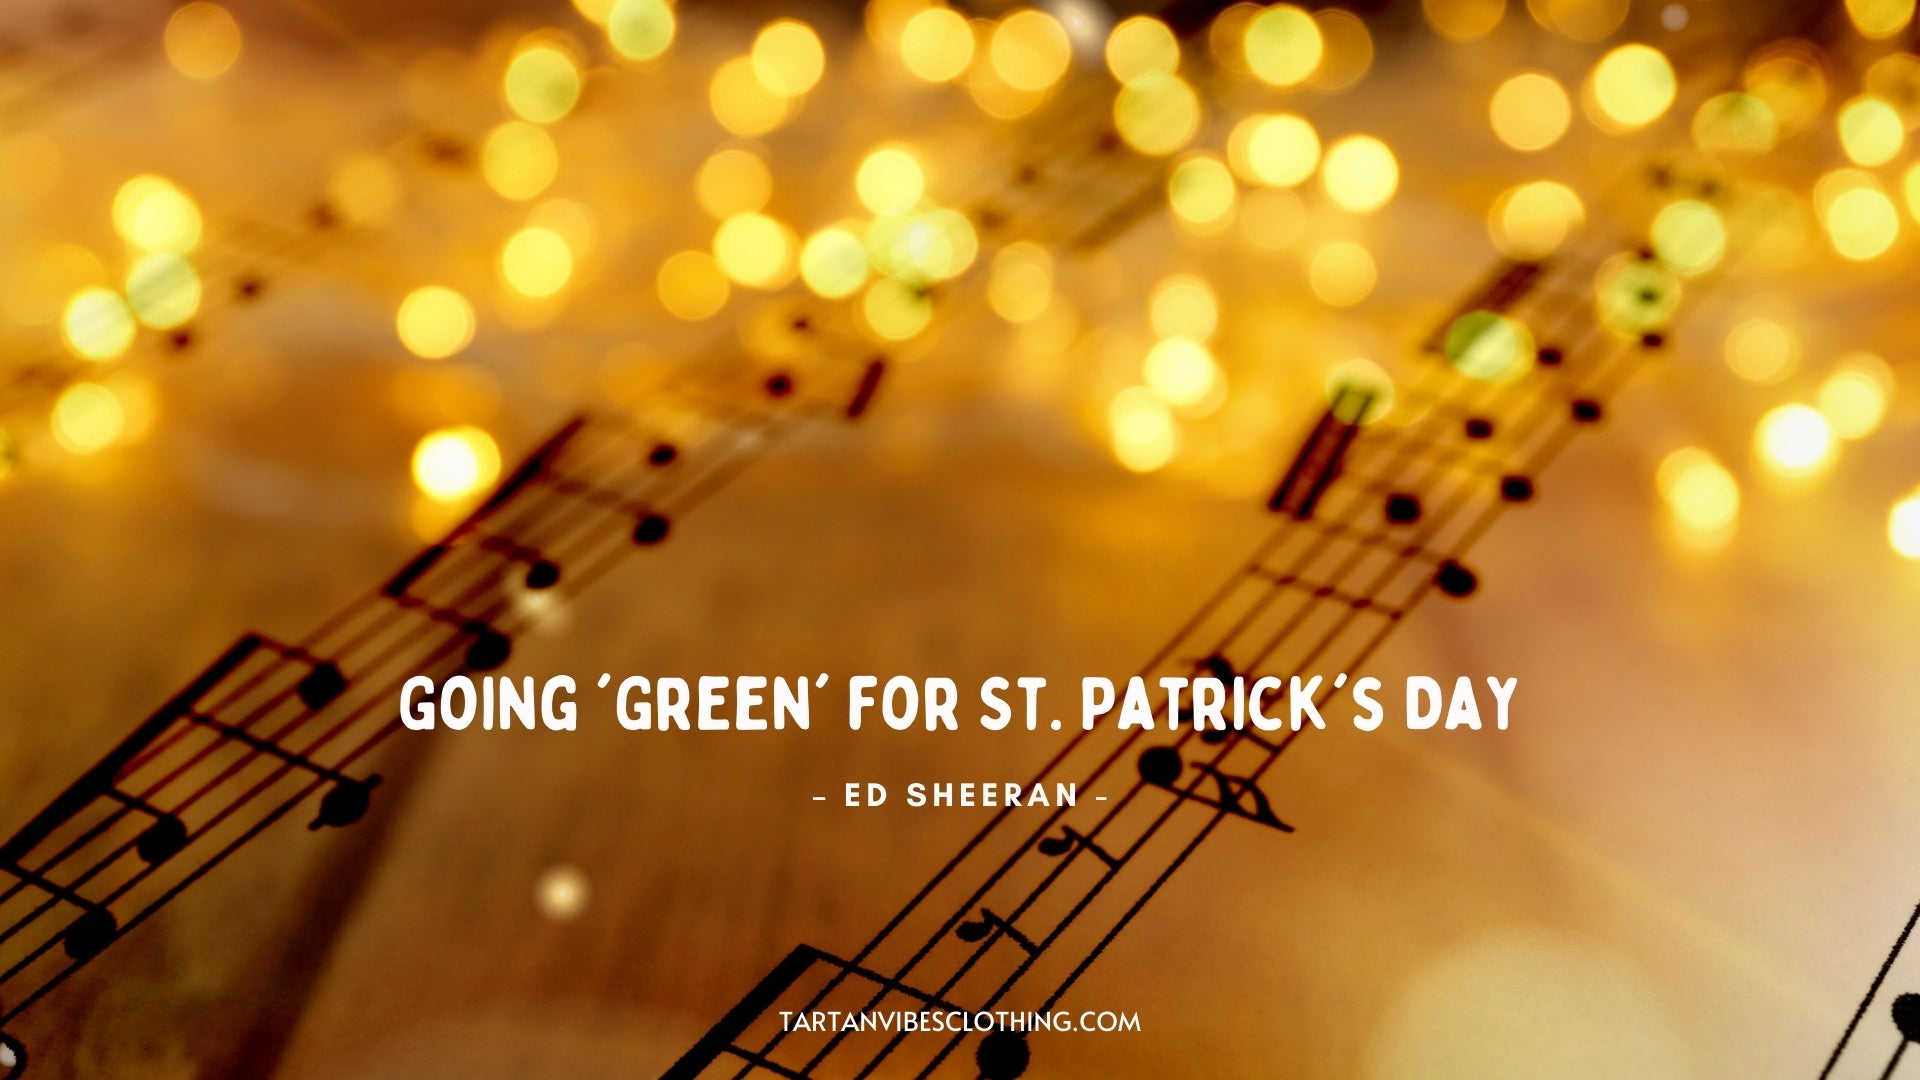 St. Patrick’s Day Instagram Captions Inspired by Songs